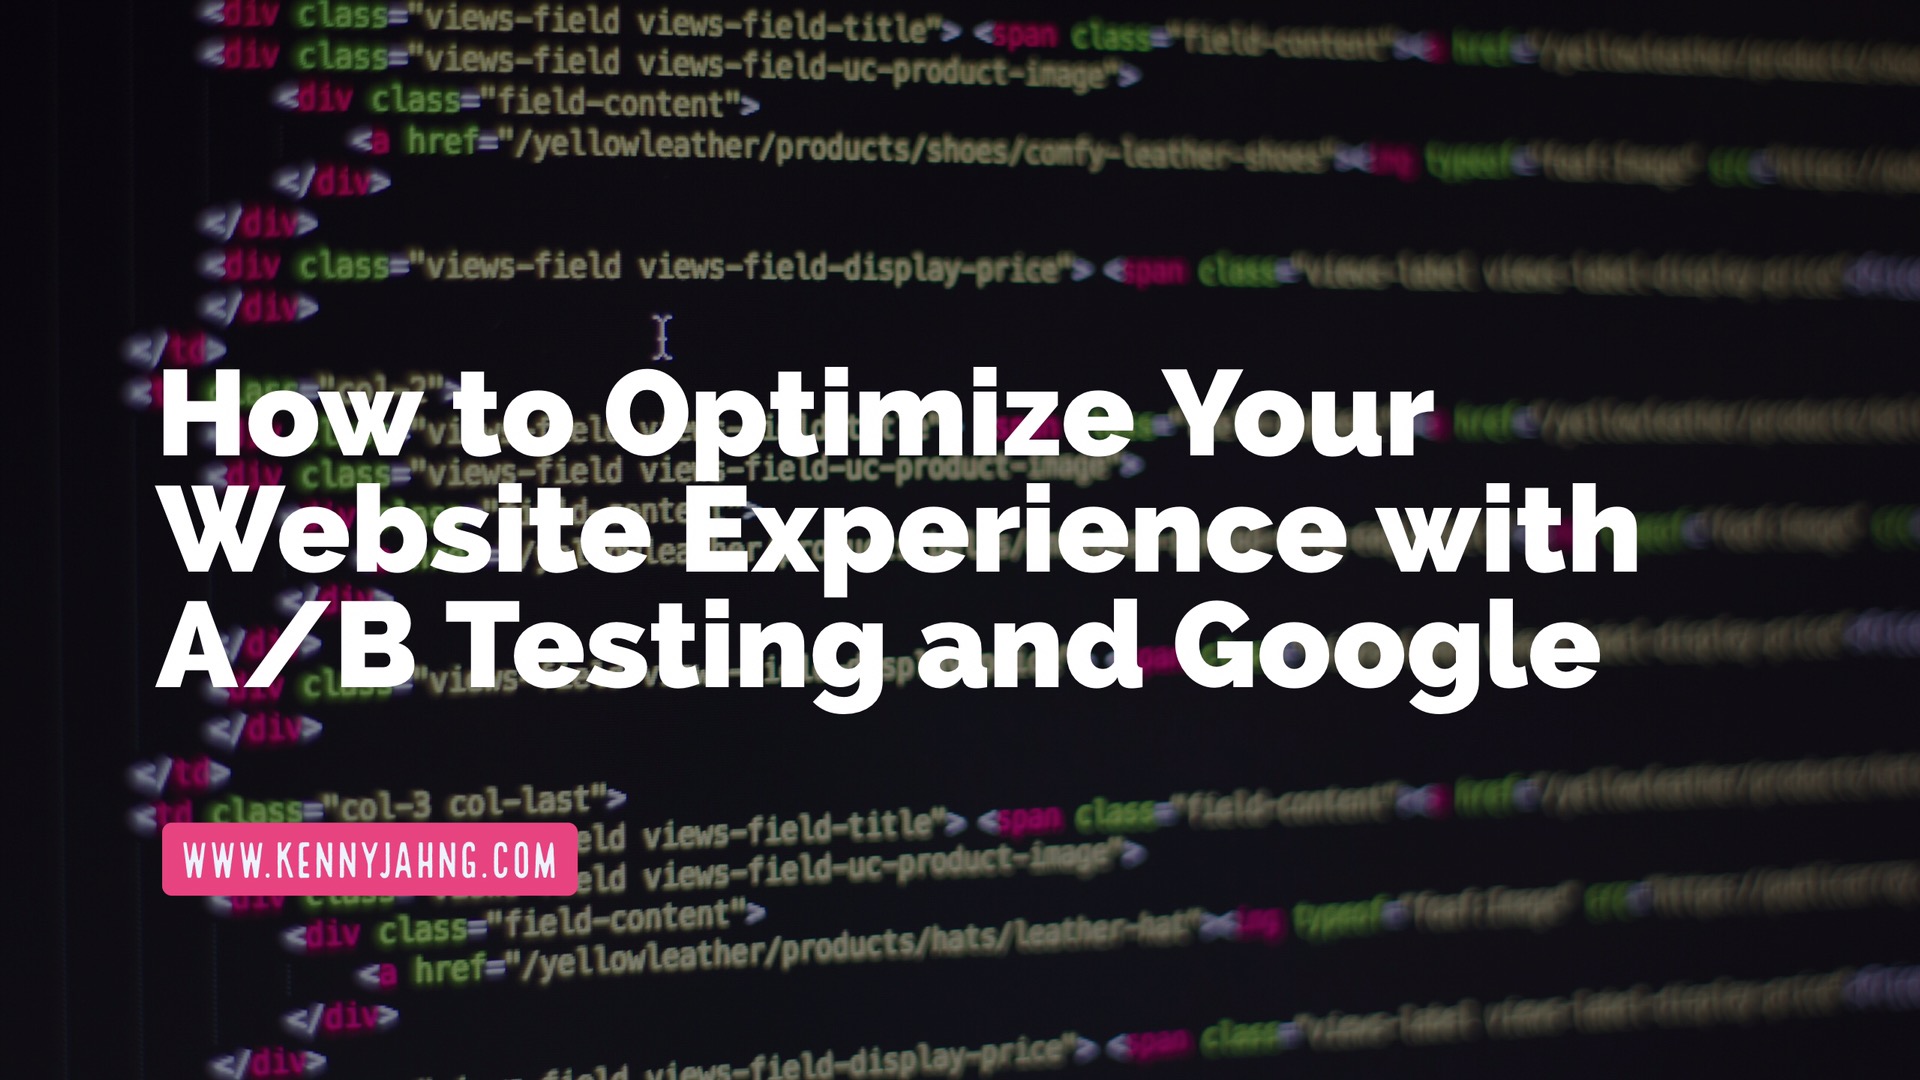 How to Optimize Your Website Experience with A/B Testing and Google